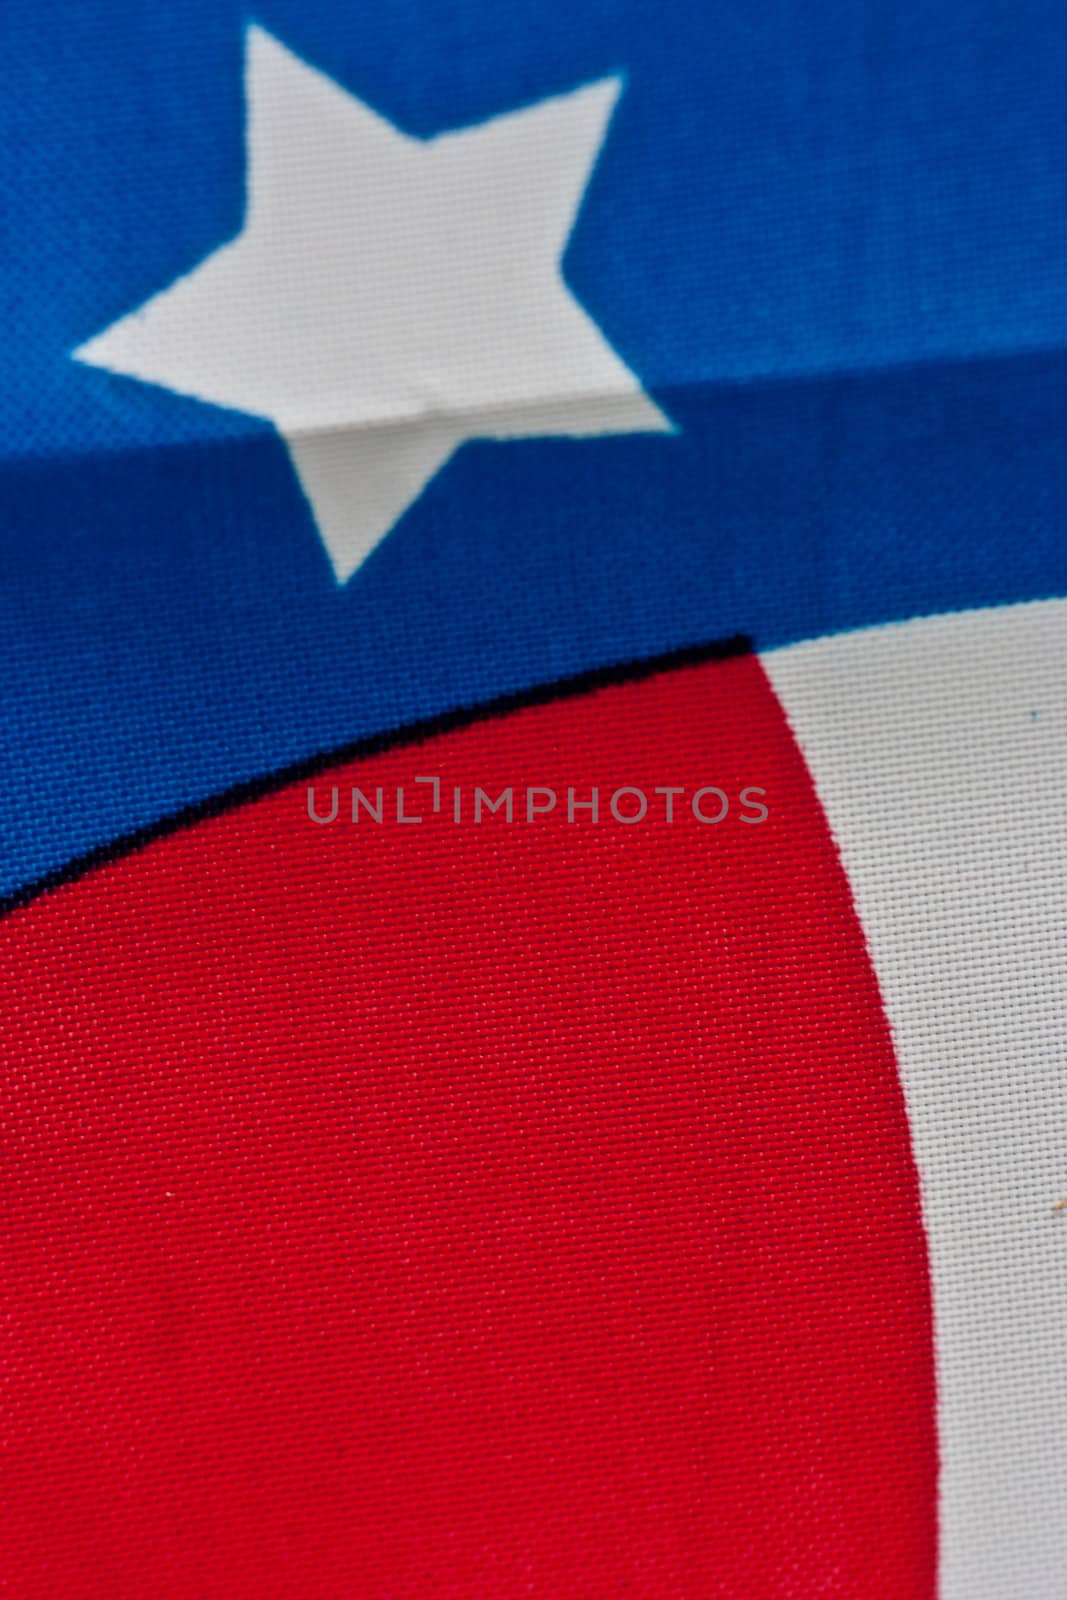 The star and stripes of the American Flag up close.